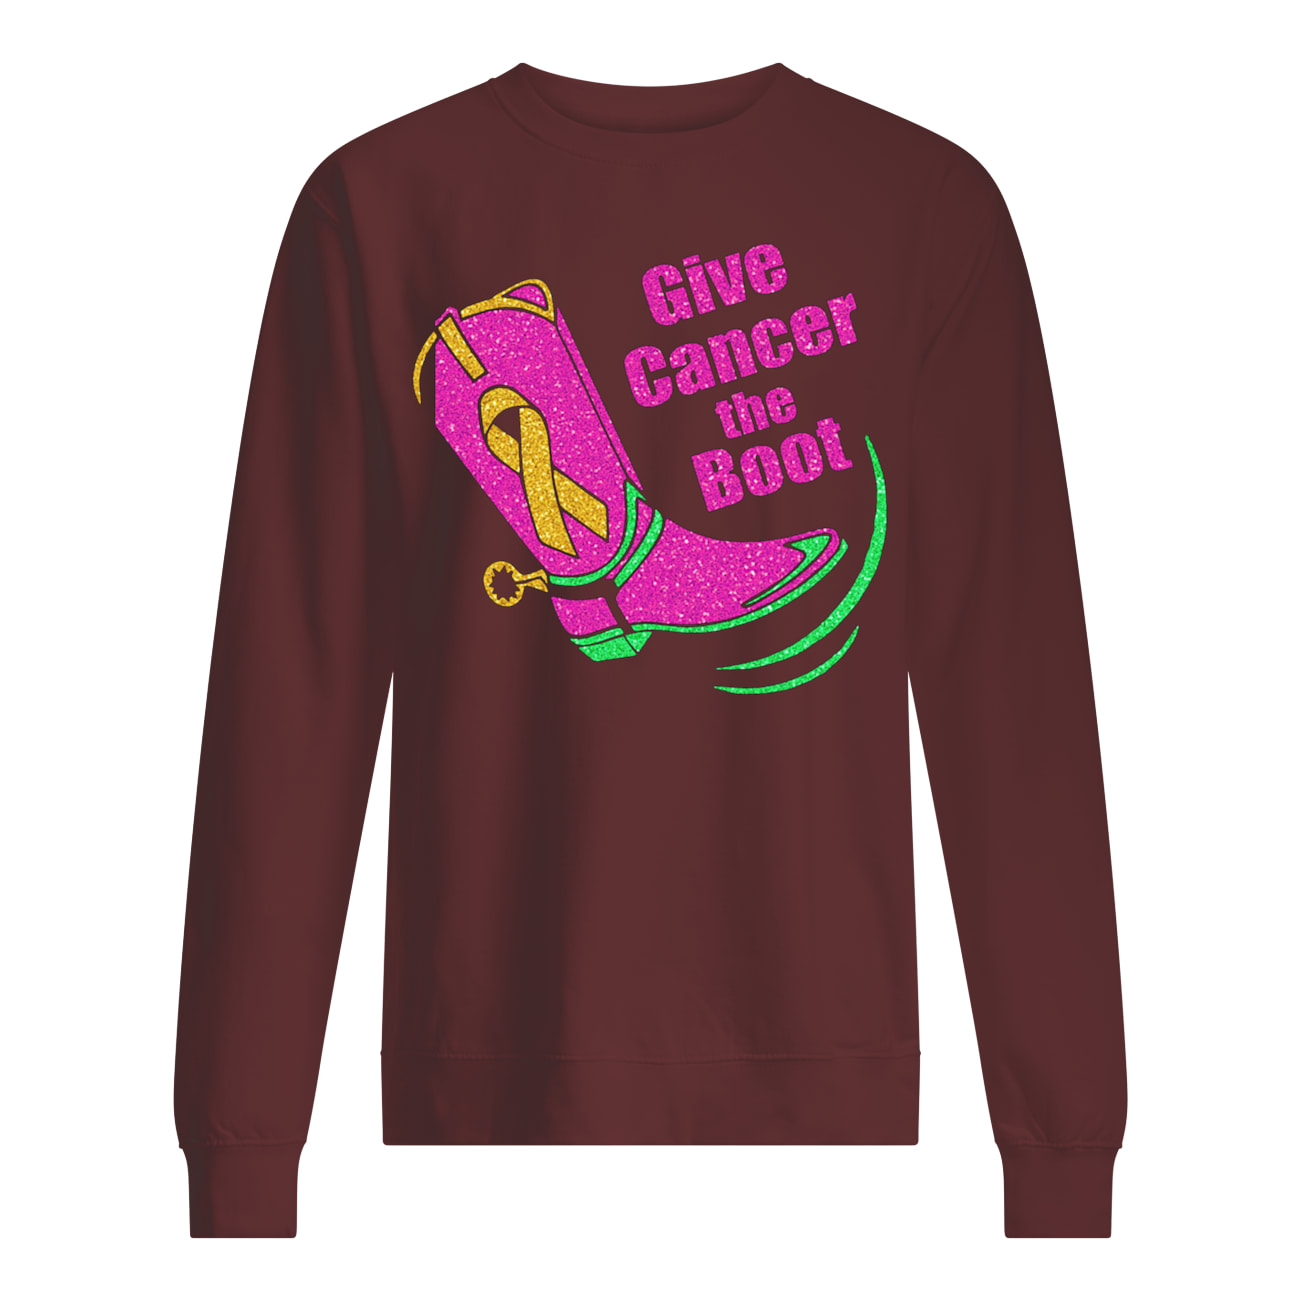 Give cancer the boot breast cancer awareness sweatshirt